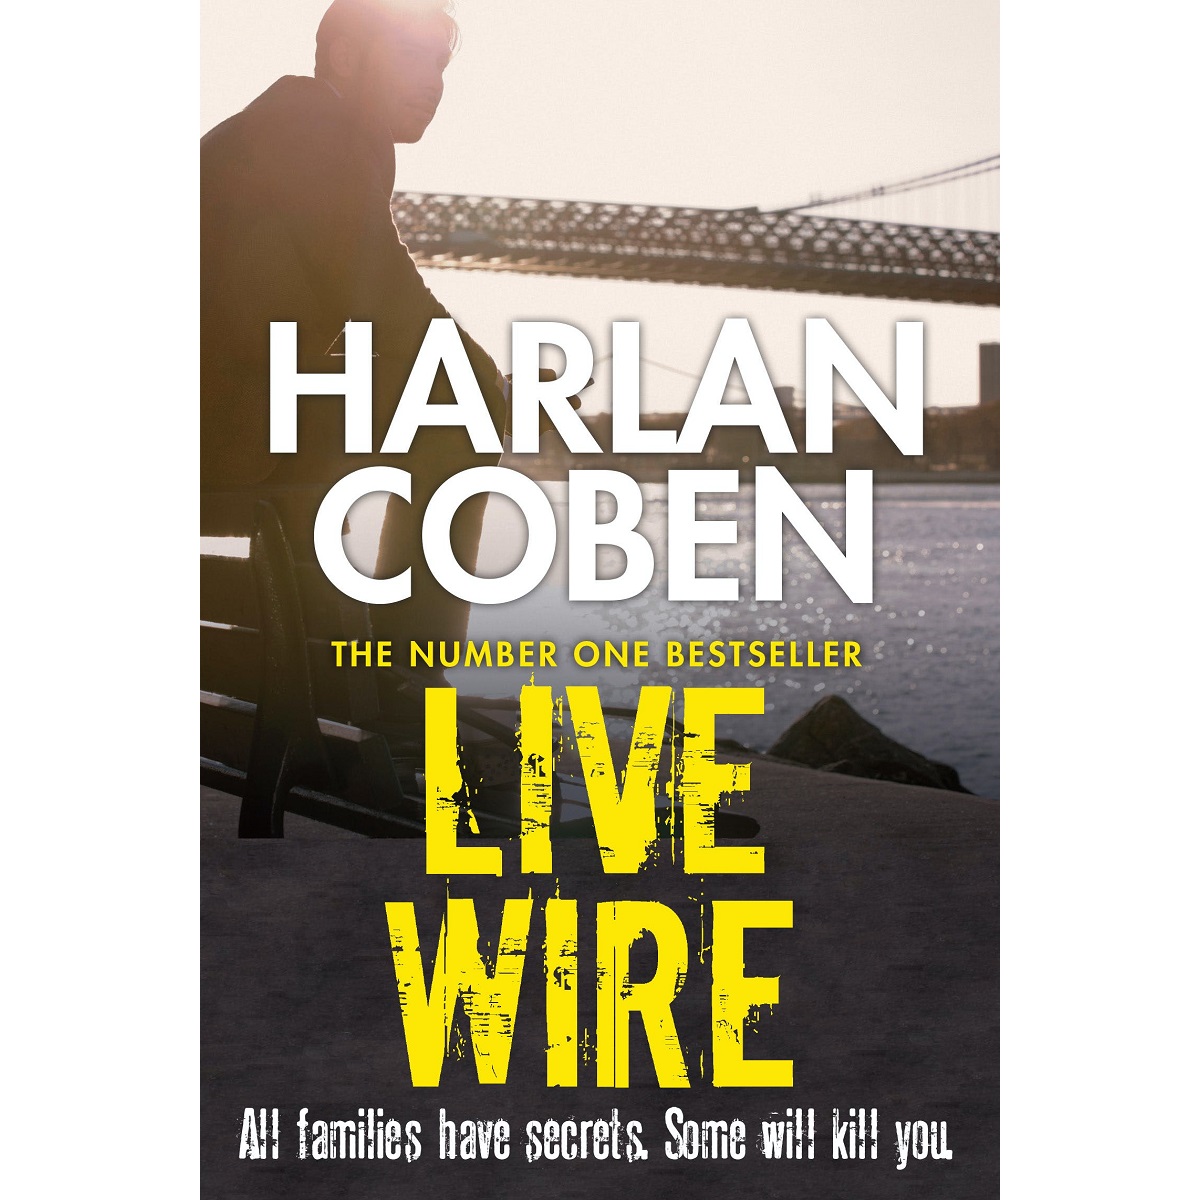 Live Wire By Harlan Coben